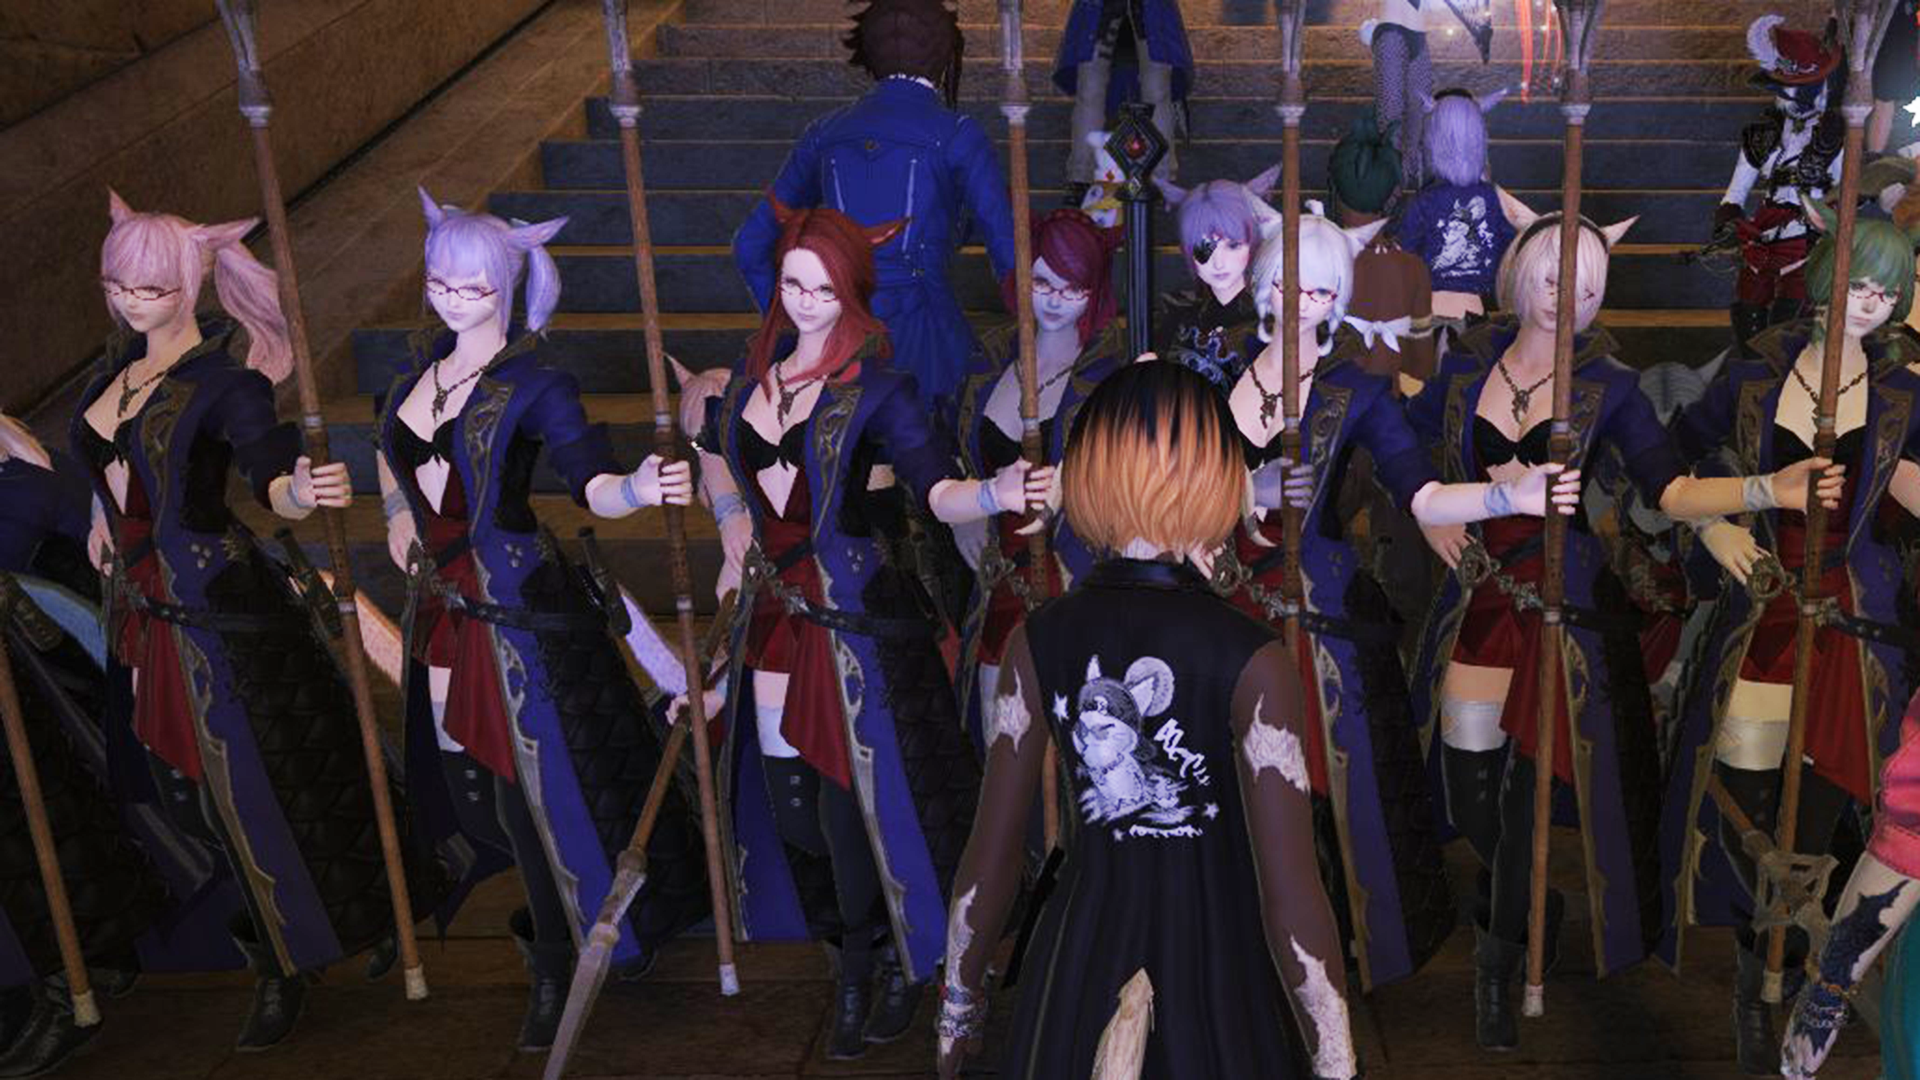 Final Fantasy 14 erotic roleplaying server currently under the protection  of a catgirl army | PC Gamer